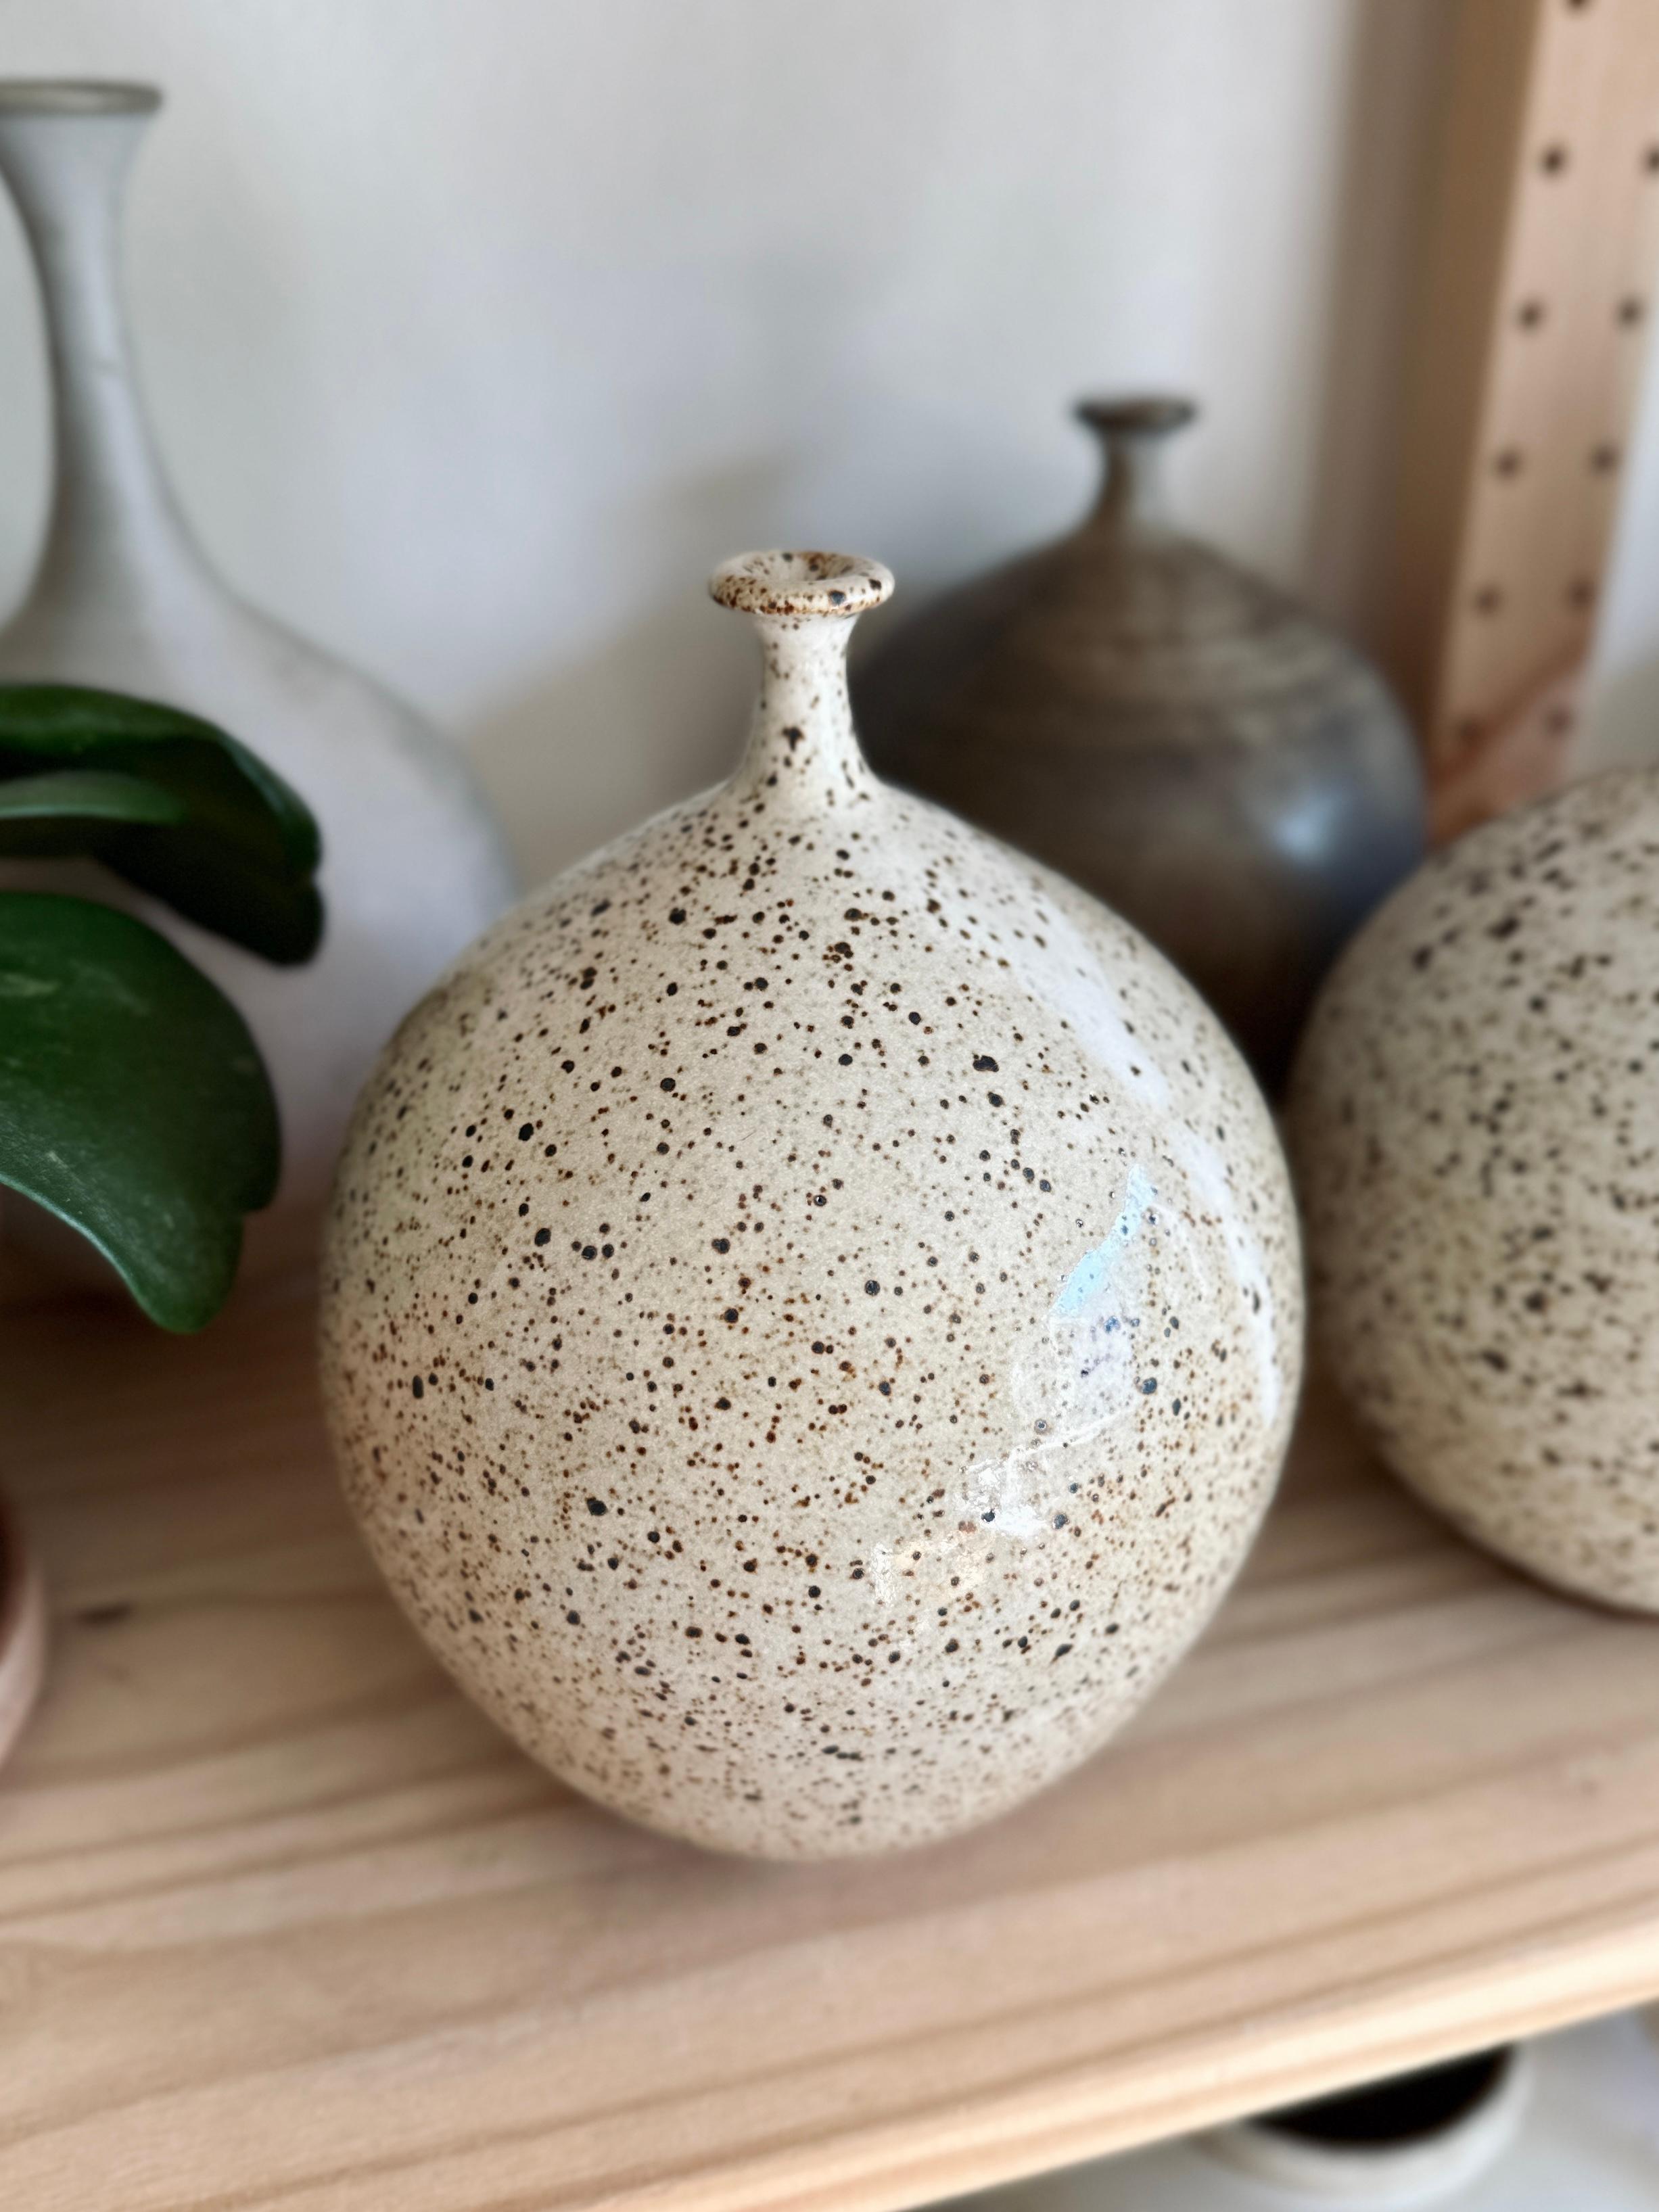 Wheel-thrown speckled bottleneck vessel glazed in warm glossy white. Handmade from stoneware, this piece serves as a testament to the timeless beauty of heirloom pottery, bringing an organic serenity to your dearest spaces. 

Dimensions: 7.5”t x